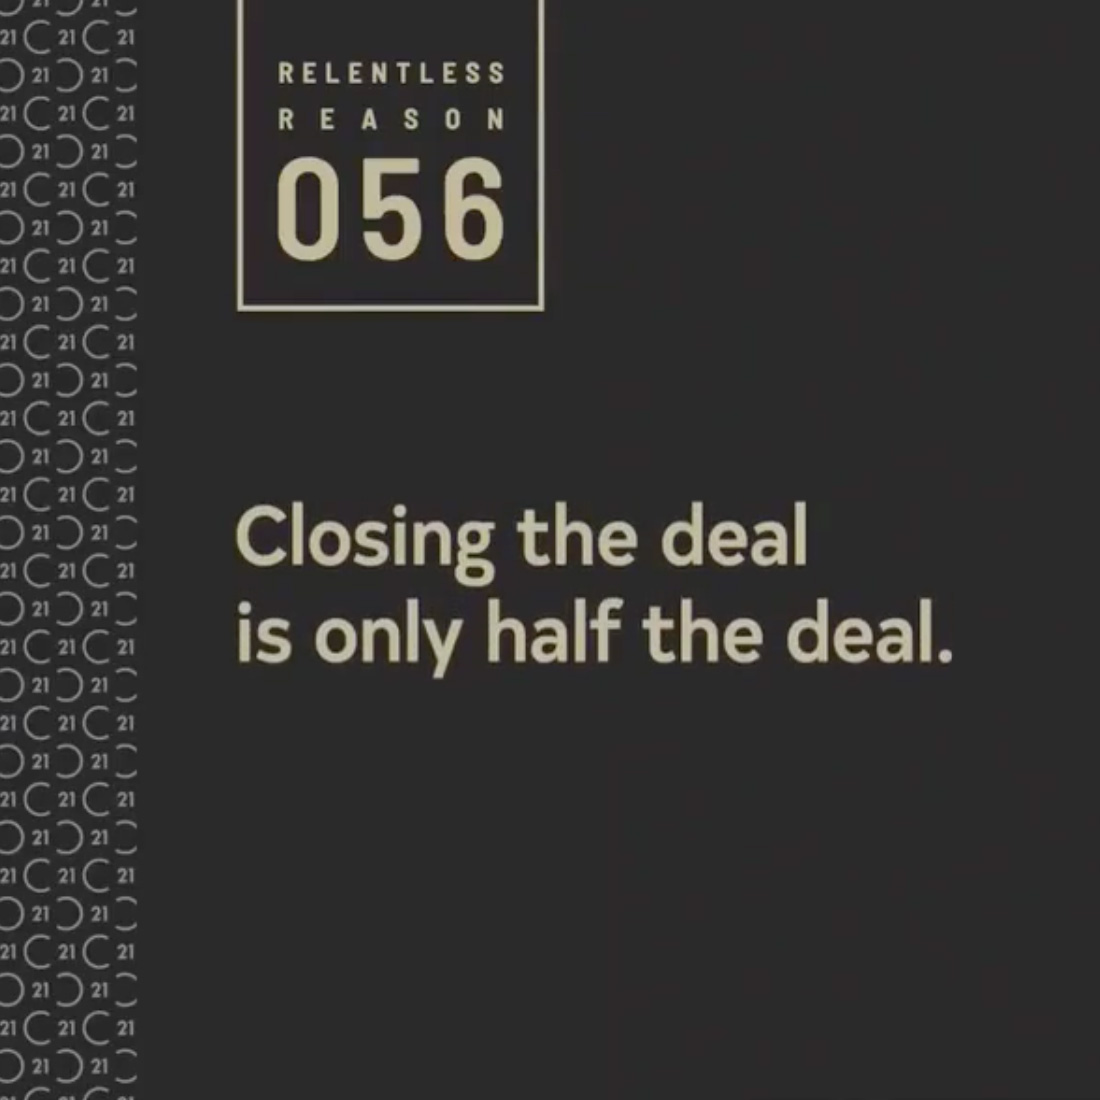 Closing the deal is only half the deal